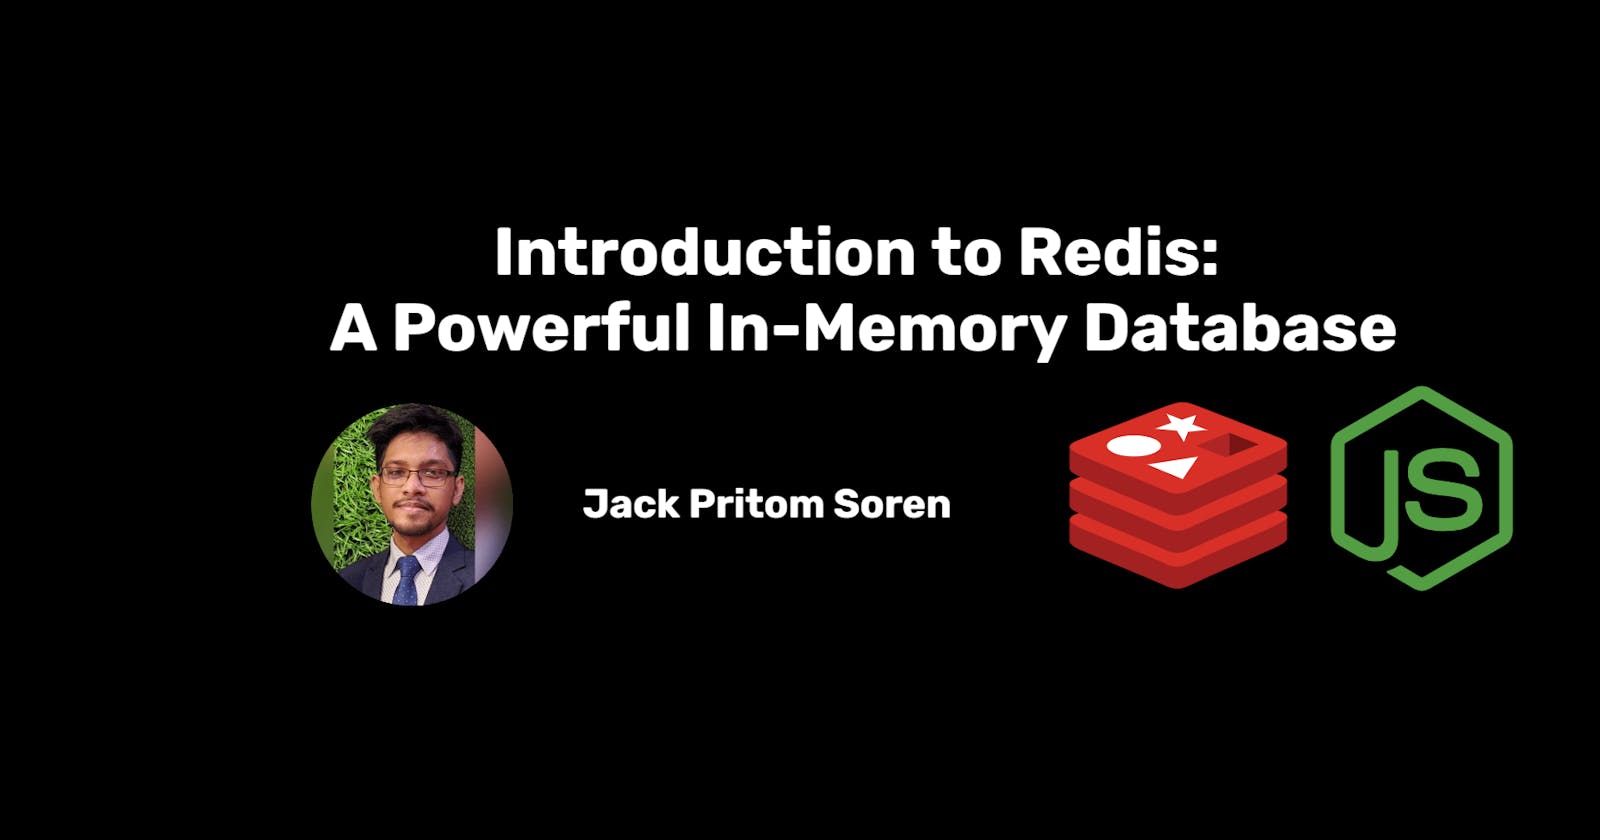 Introduction to Redis: A Powerful In-Memory Database